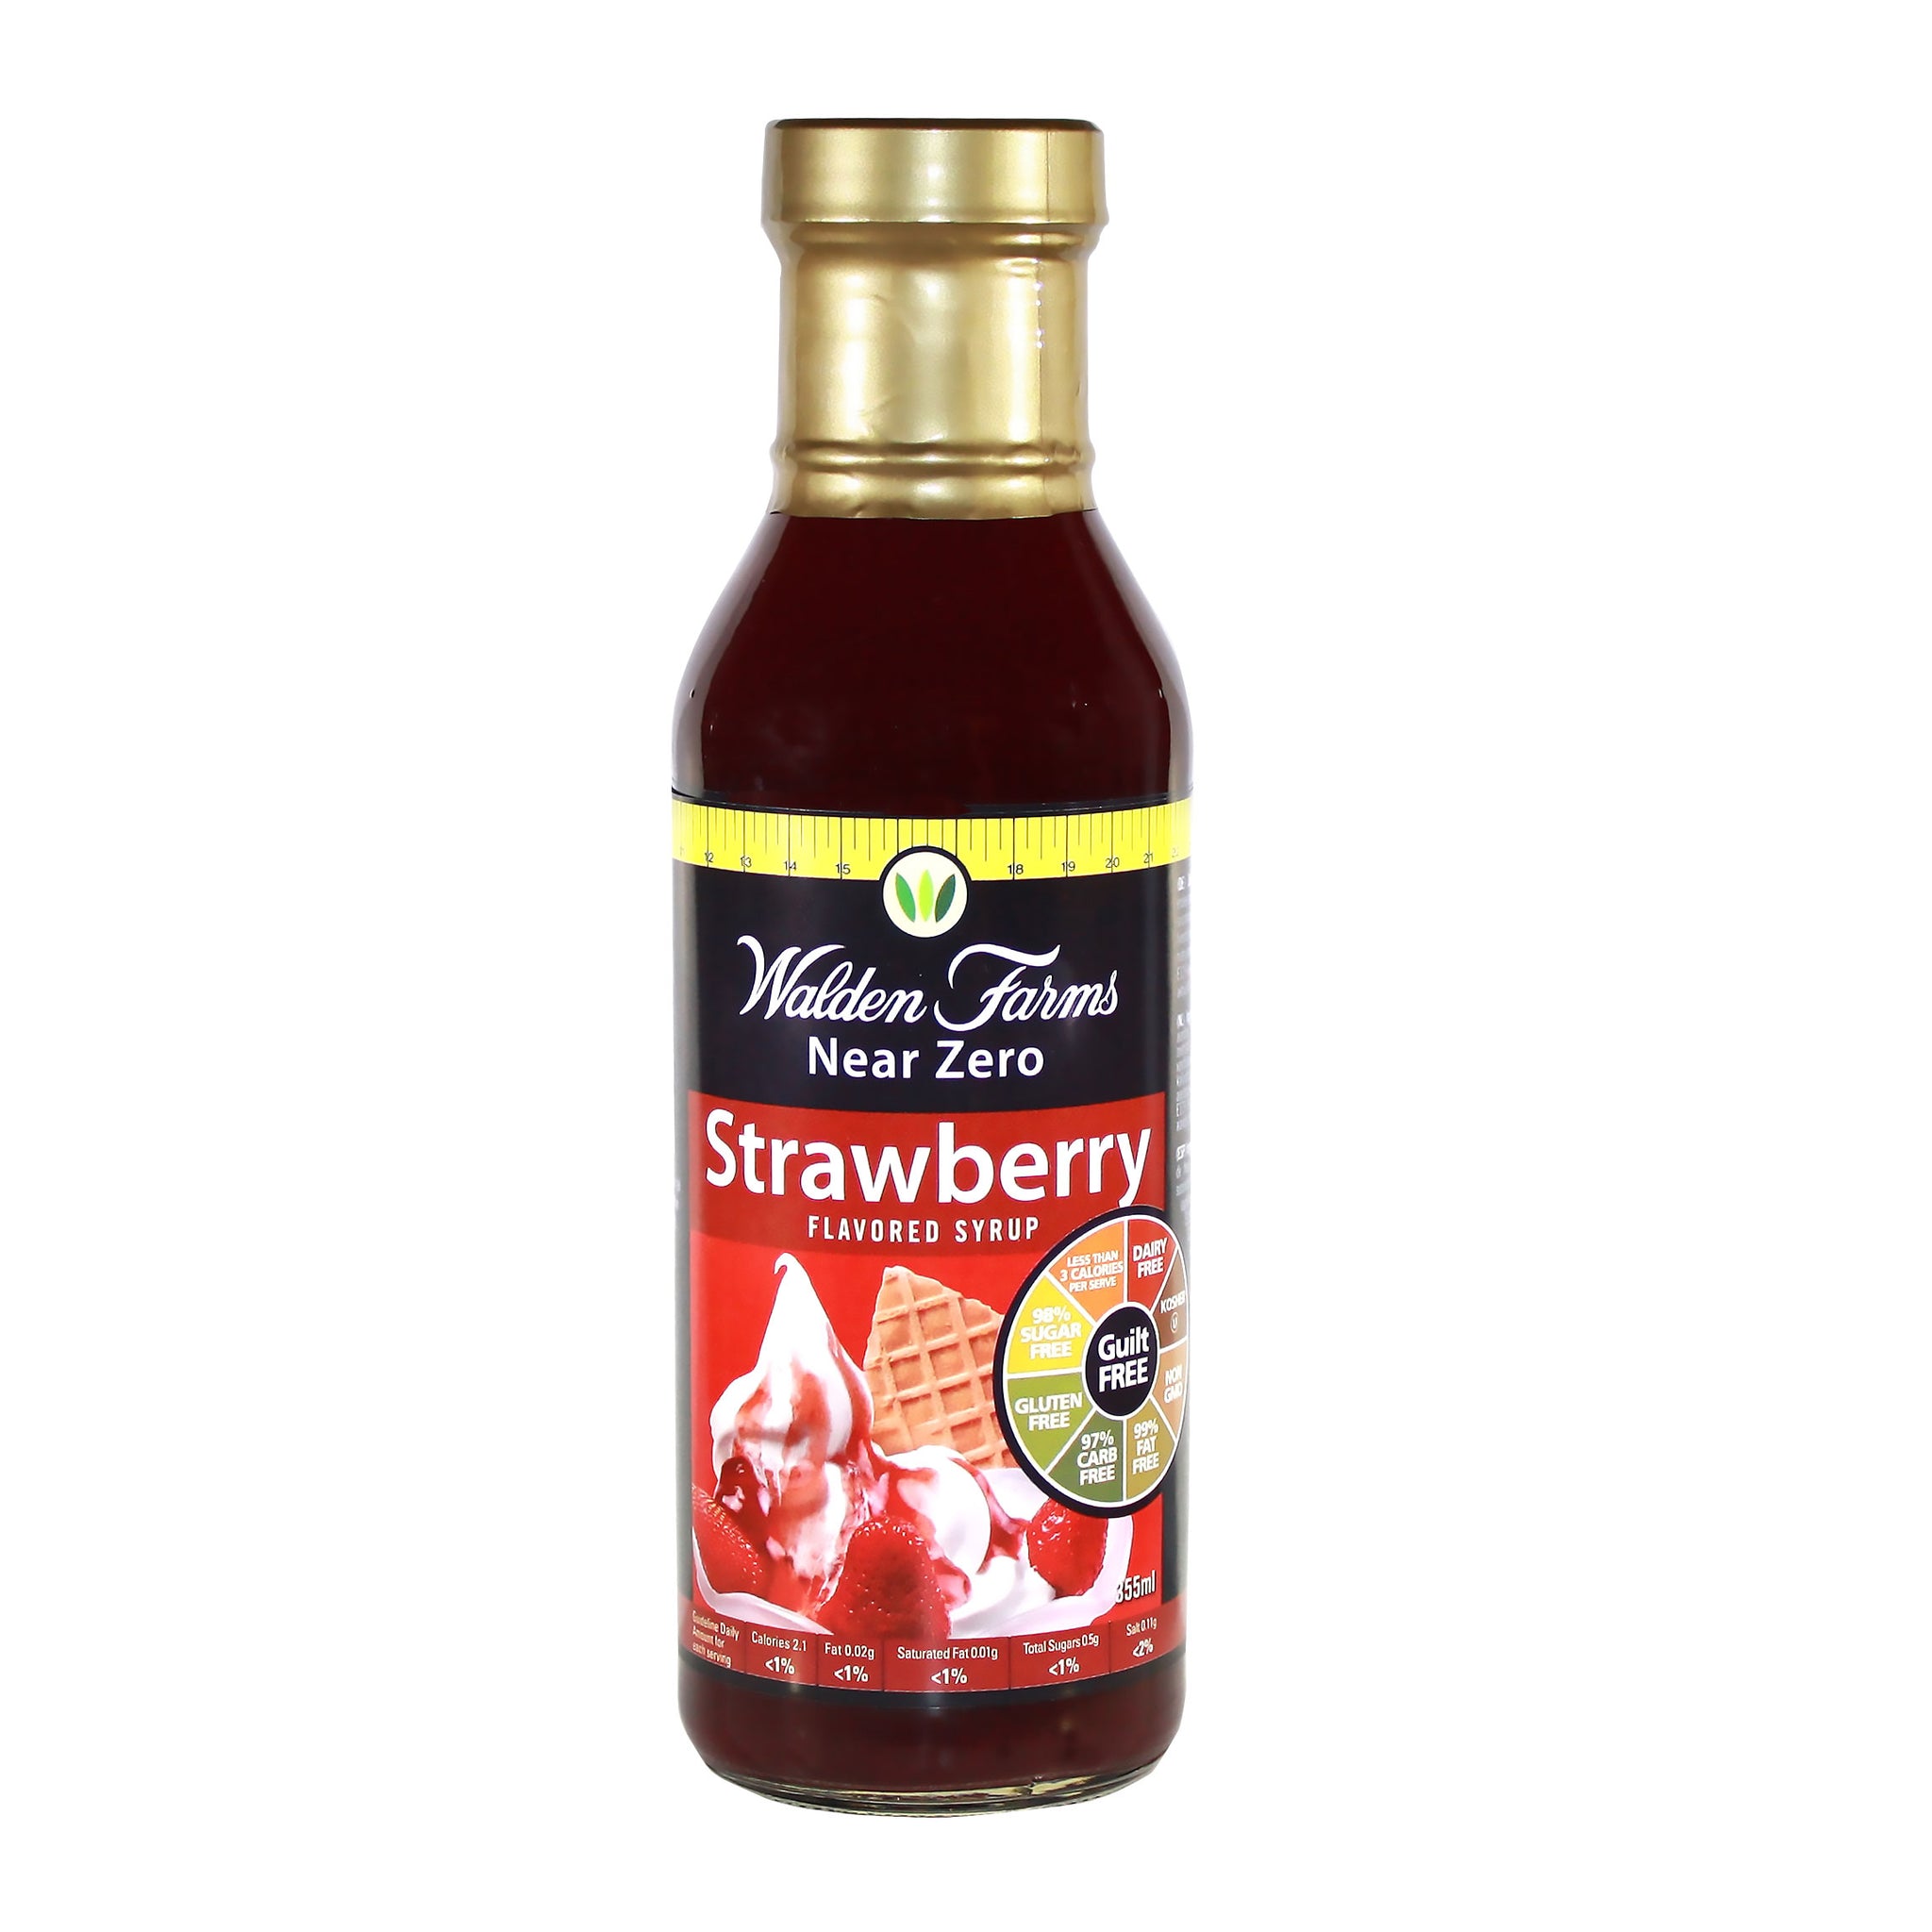 Dairy Free Strawberry Syrup with Near Zero Calories, Fats and Sugar